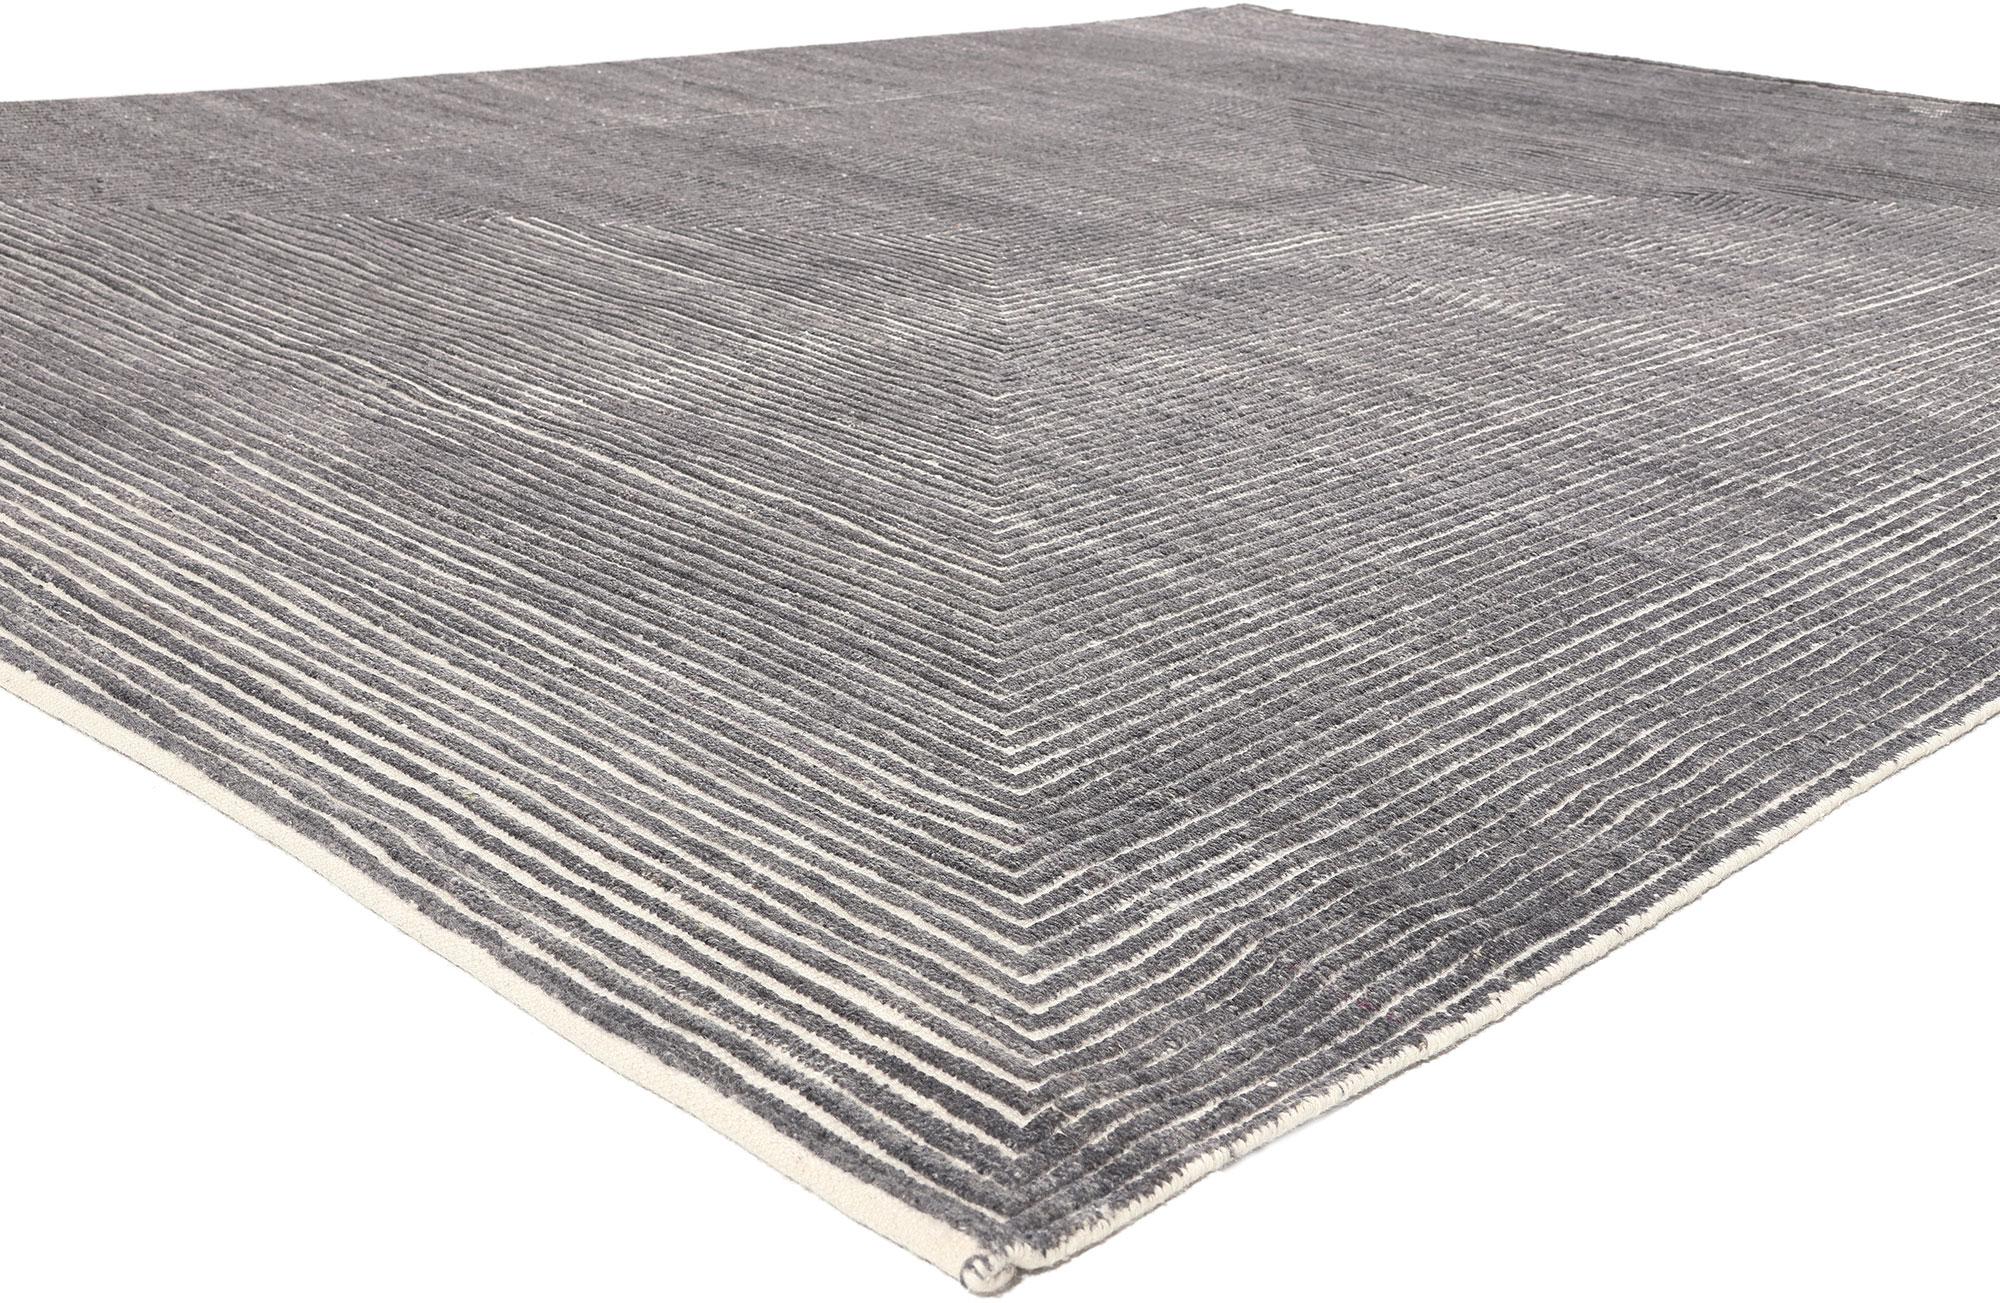 30982 Modern Gray Opt Art High-Low Rug with, 09'00 x 11'10.
Sublime simplicity meets tantalizing texture in this modern gray high-low rug. The raised design and neutral colors woven into this piece work together creating a soft and subtle yet